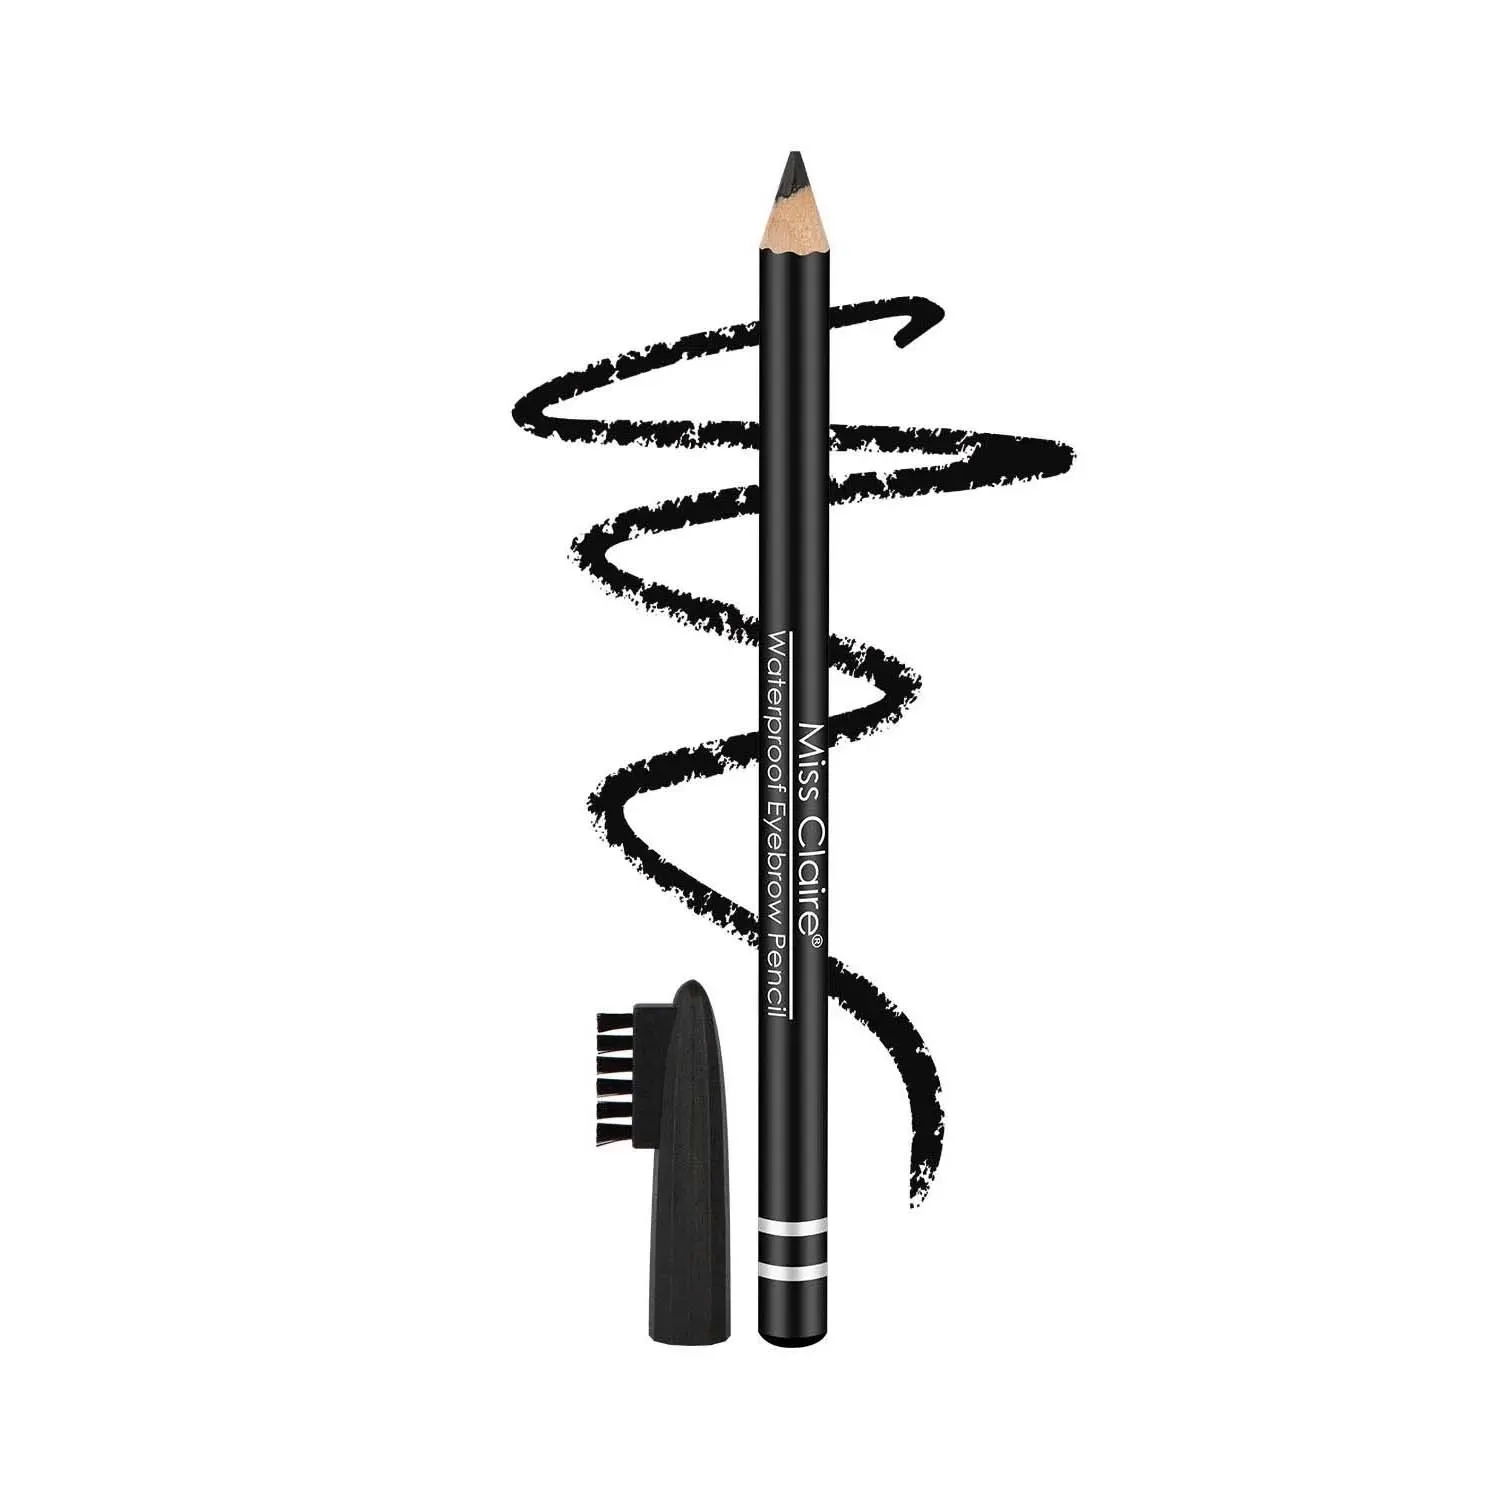 Miss Claire | Miss Claire Waterproof Eyebrow Pencil - 01 Black (1.4g)